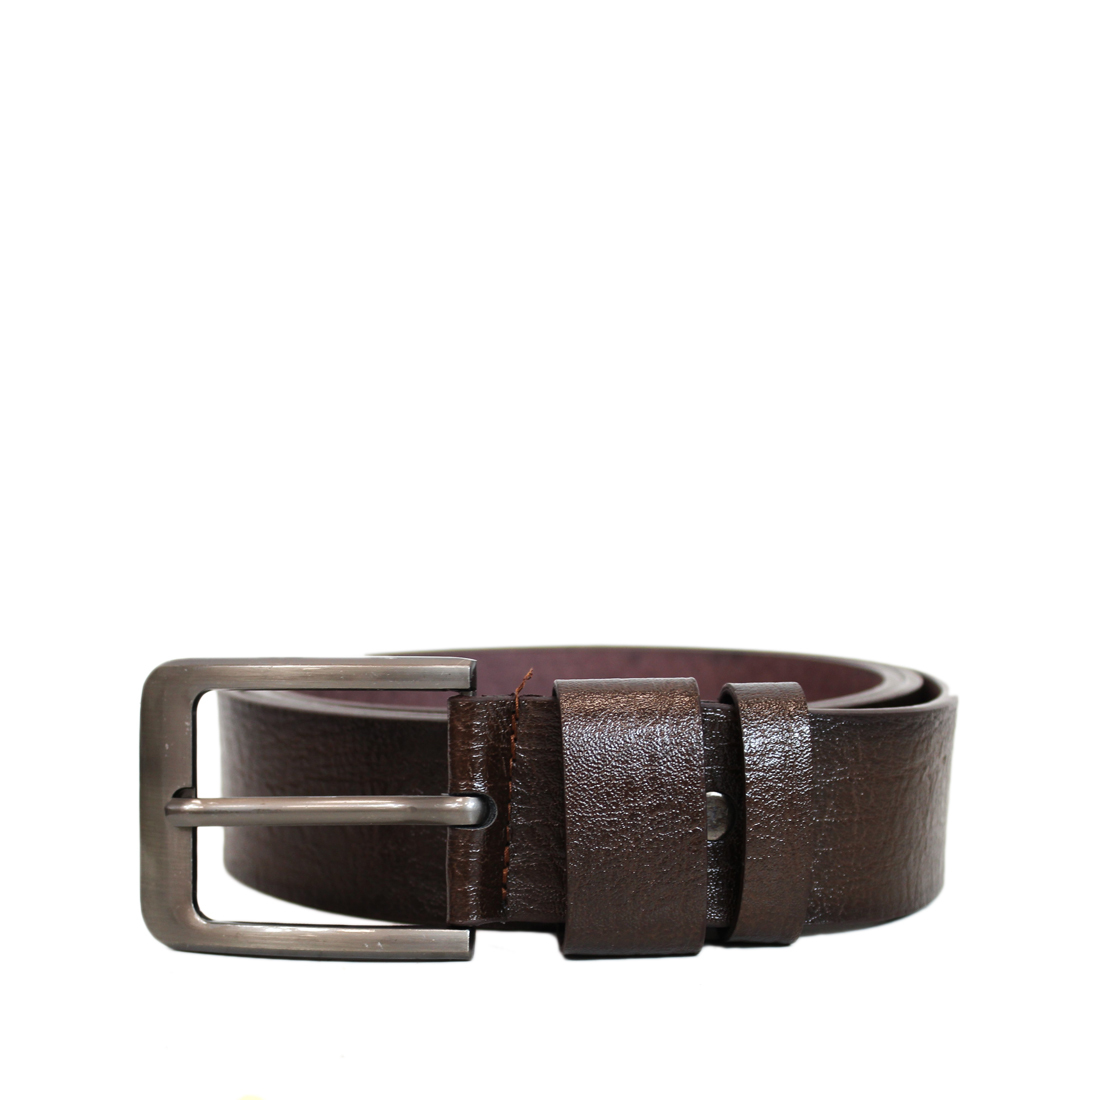 Wide Shiny with rectangular buckle